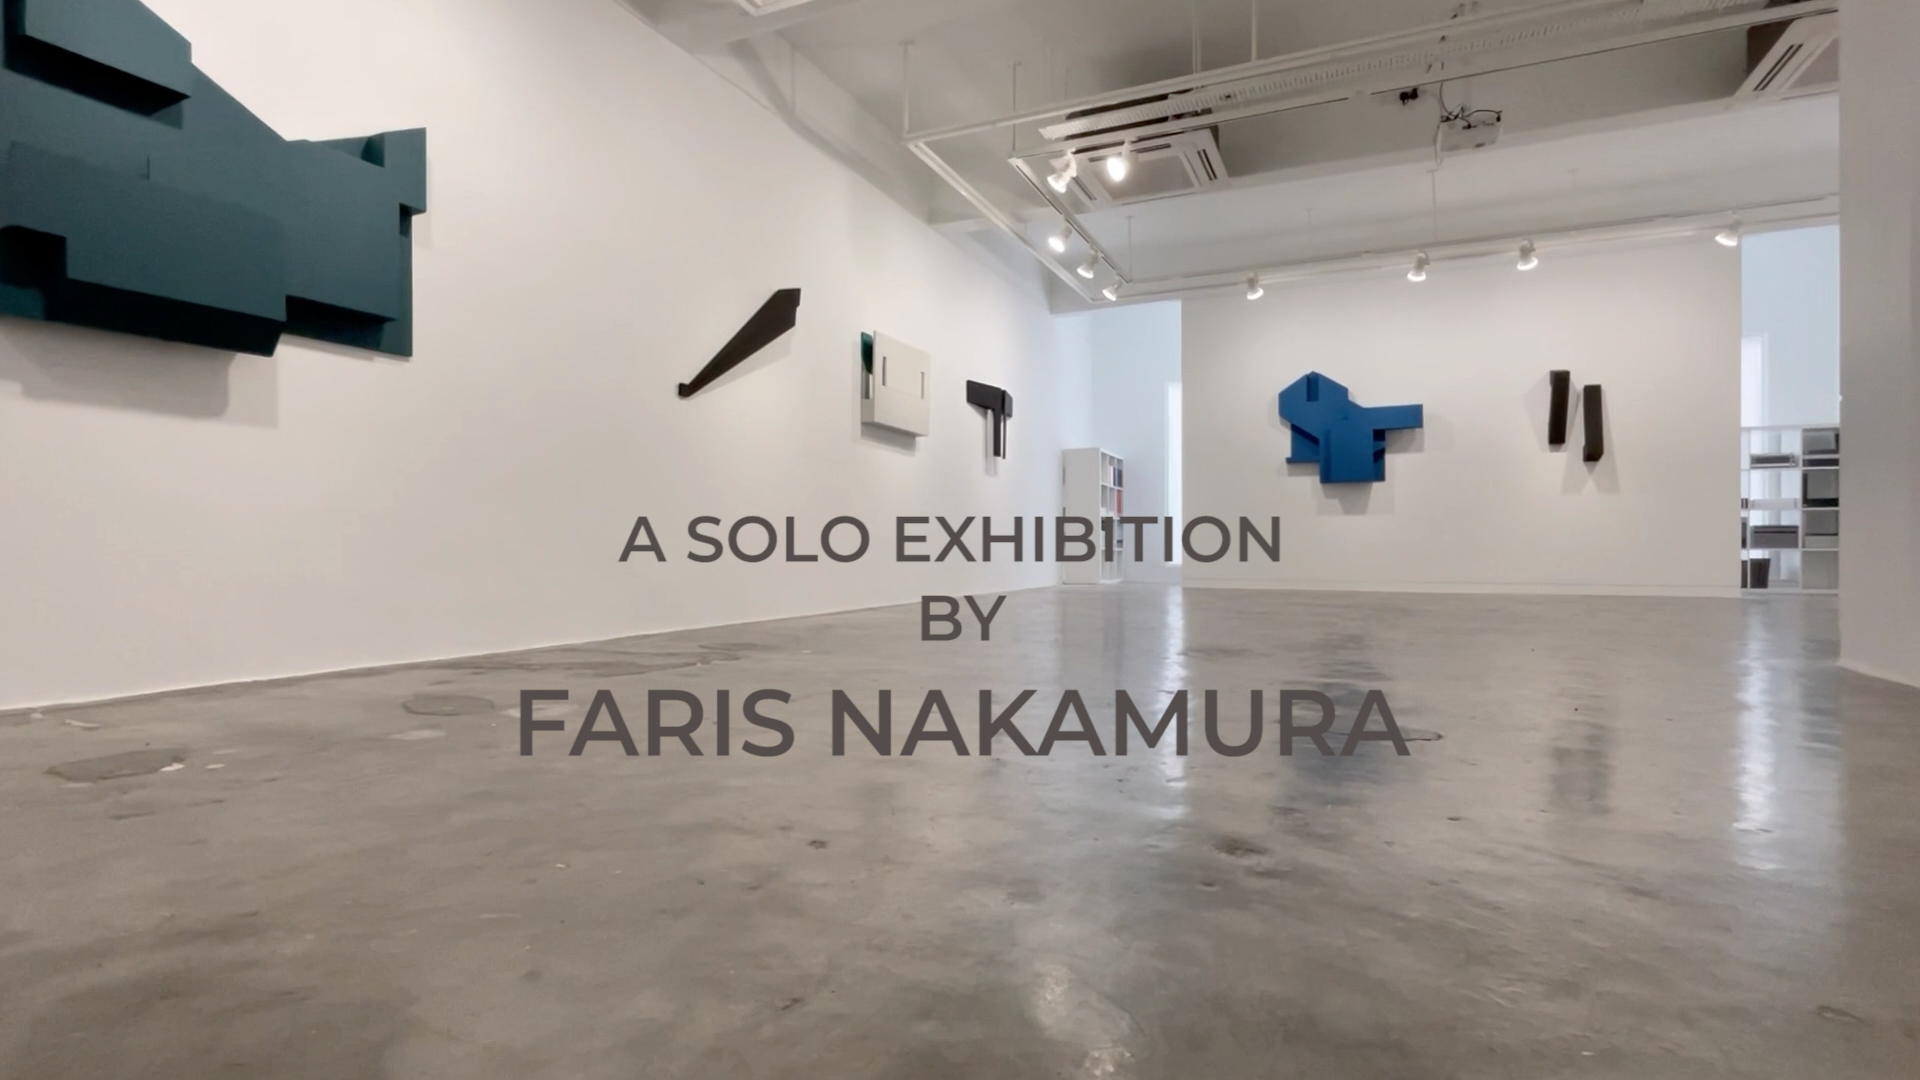 [RKFA-KL] “The Periphery Of The Other” by Faris Nakamura, 17 Sept – 2 Oct 2021